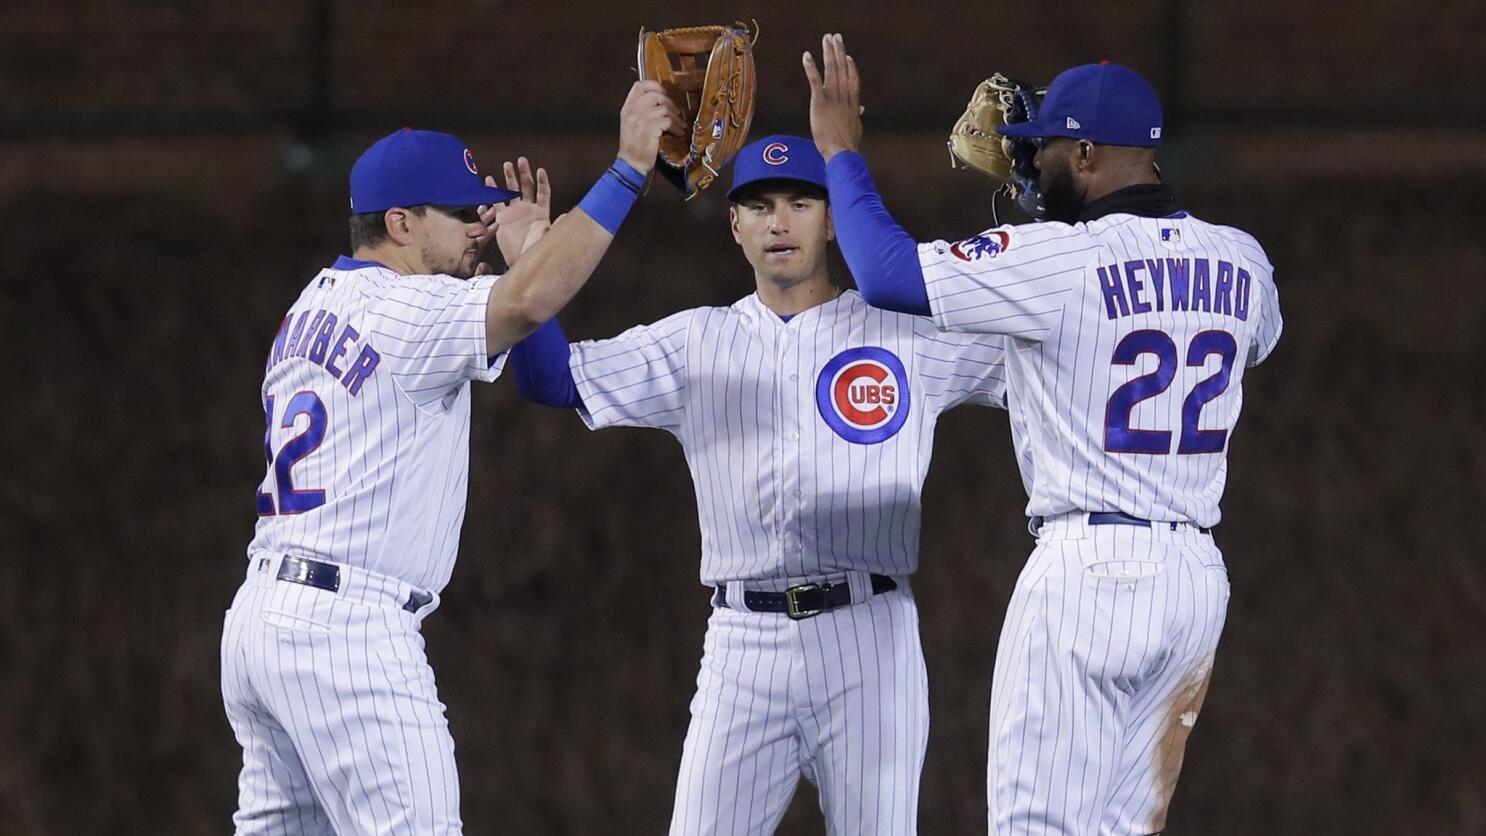 Cubs End 108-Year Wait for World Series Title, After a Little More